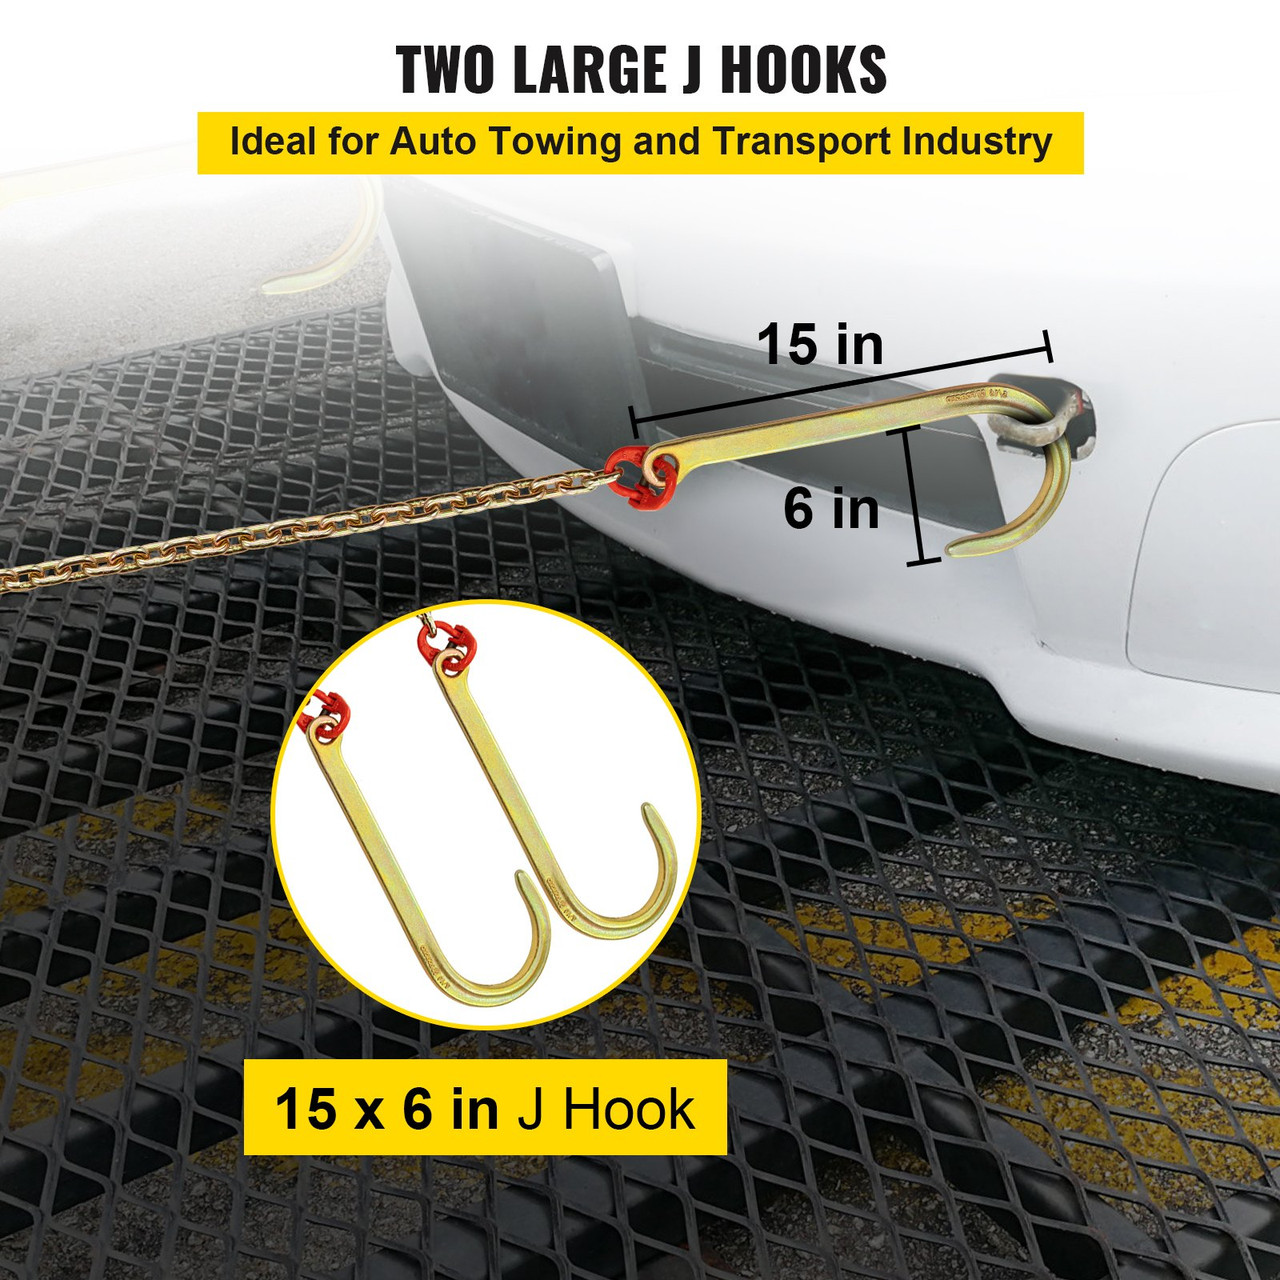 J Hook Chain, 5/16 in x 10 ft Tow Chain Bridle, Grade 80 J Hook Transport Chain, 9260 Lbs Break Strength with JT Hook & Grab Hook, Tow Hooks for Trucks, Heavy Duty J Hook and Chain Shorteners